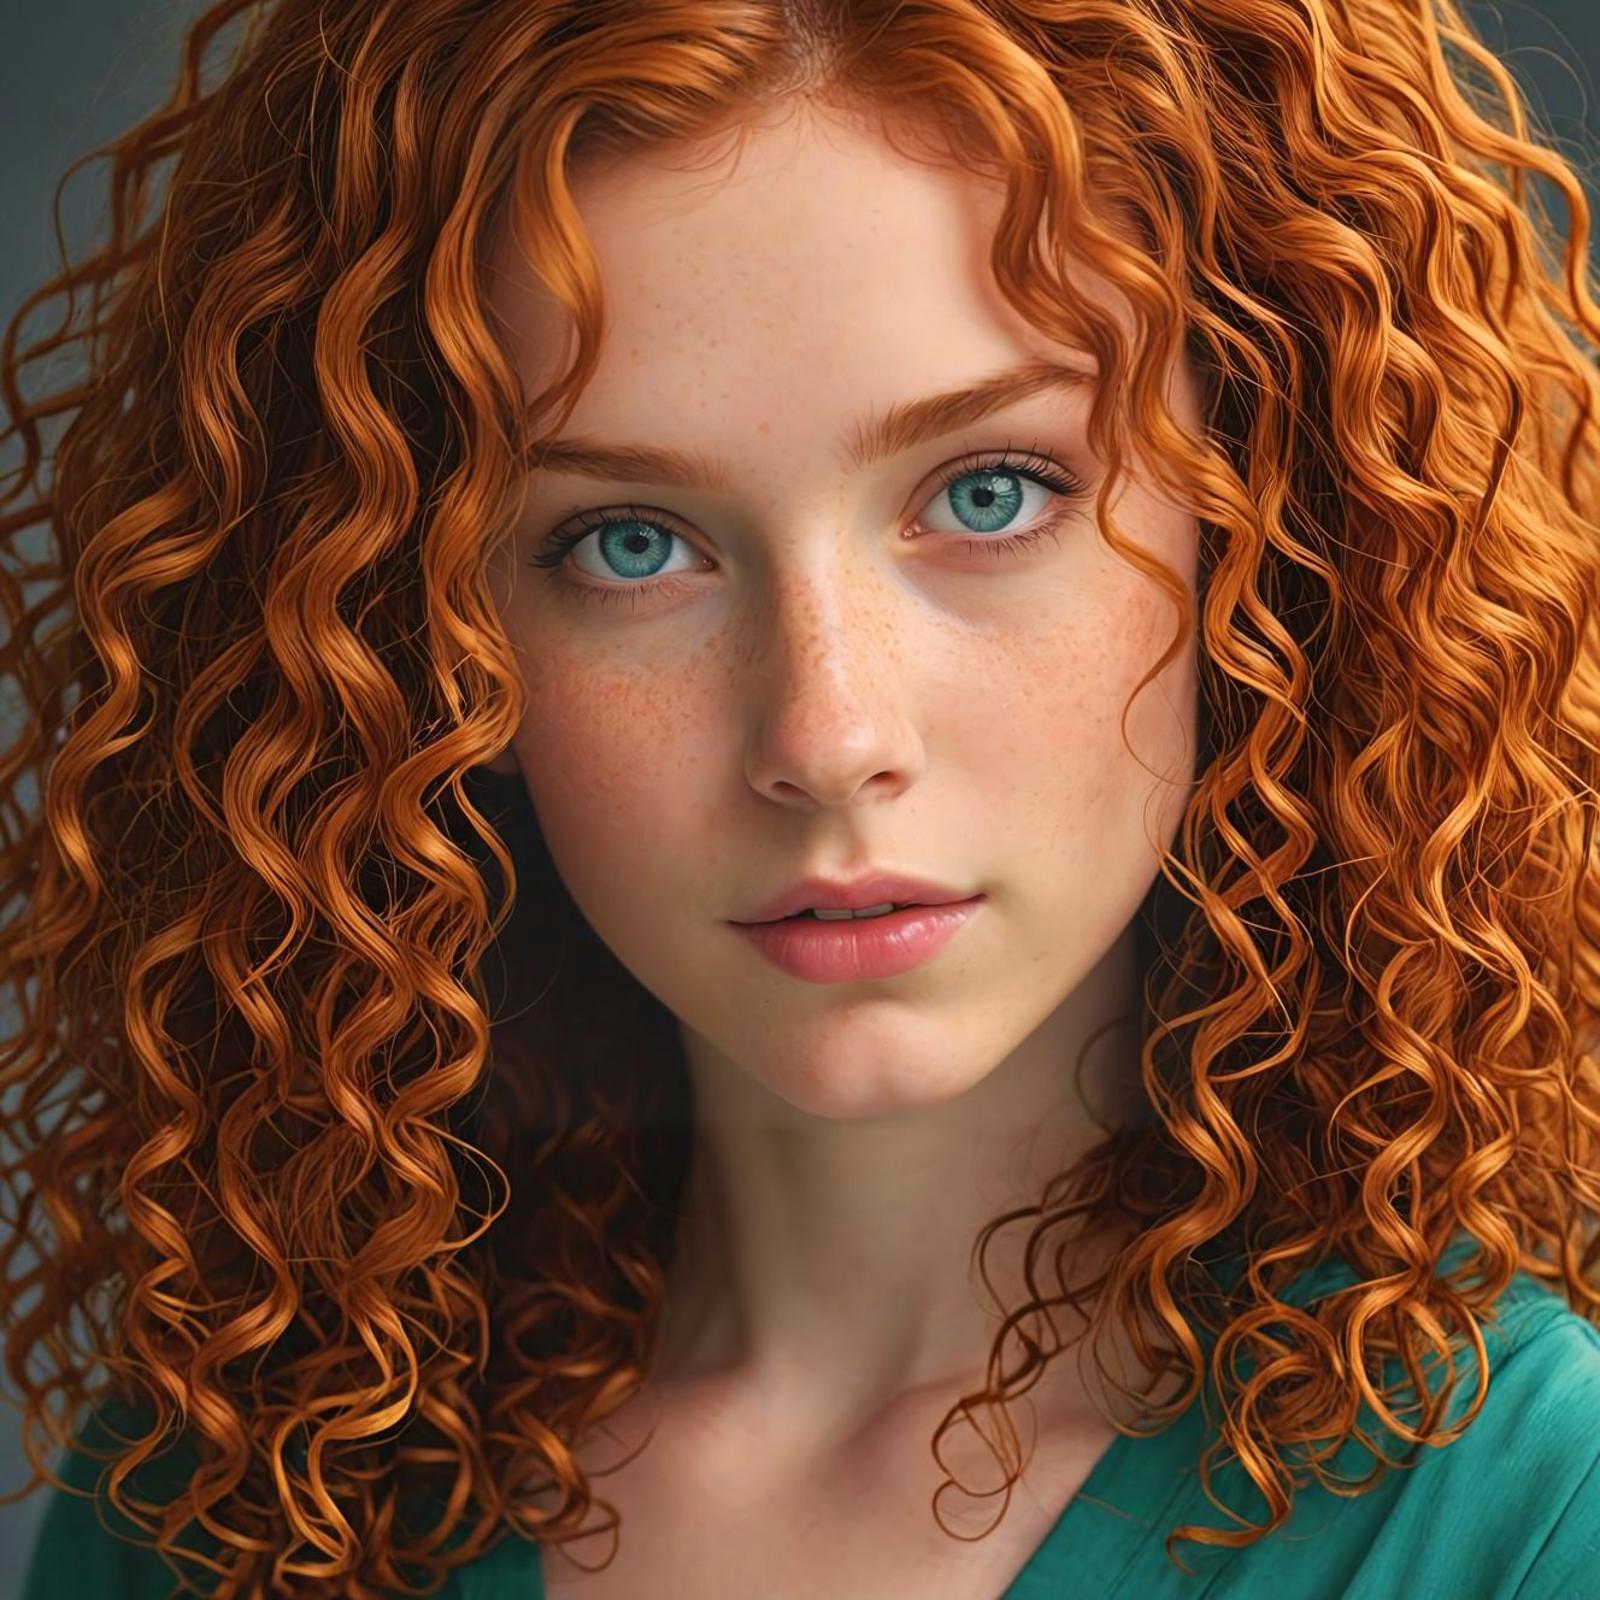 A close-up of a woman with long red curly hair and blue eyes.